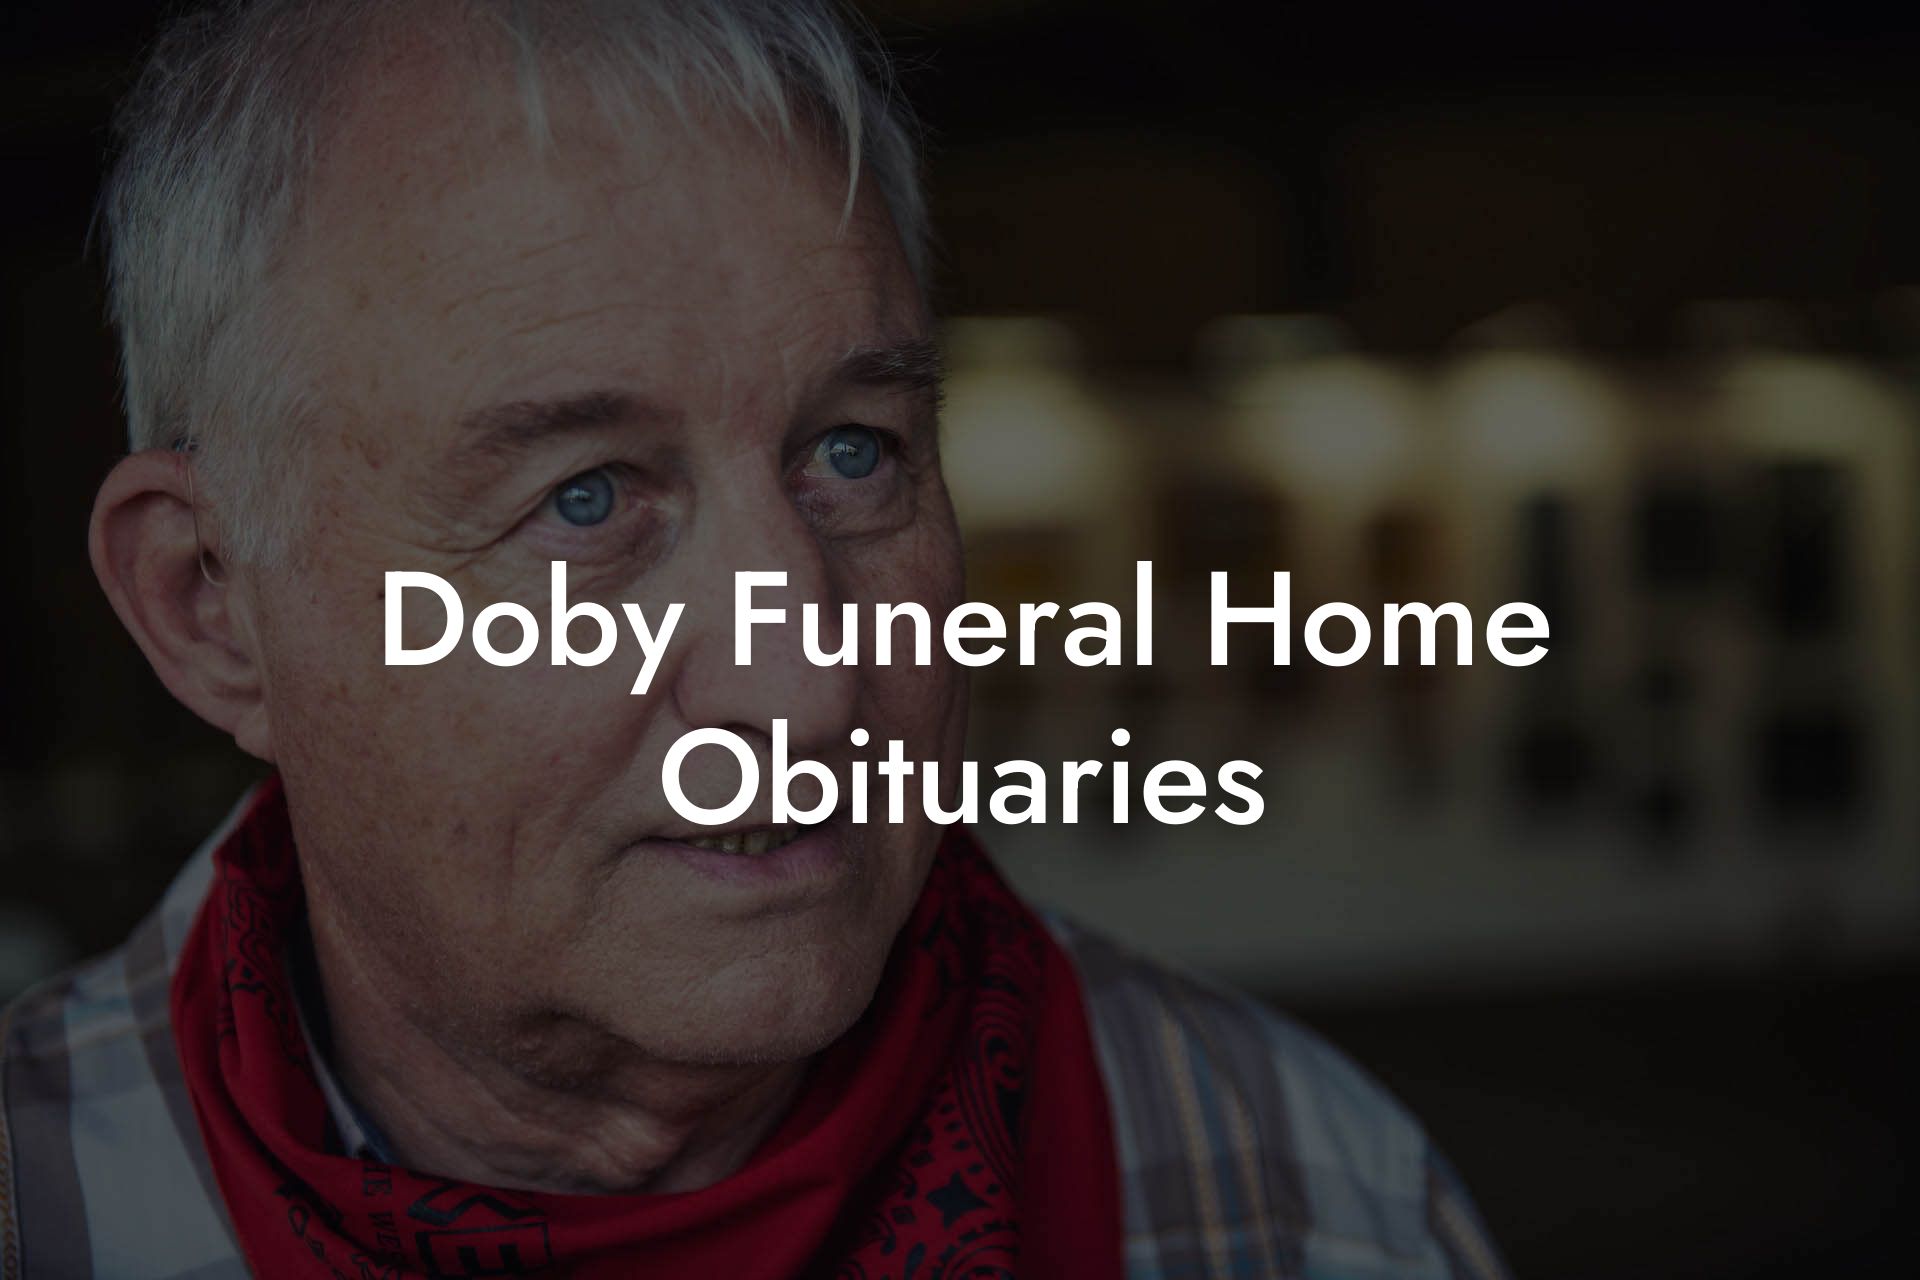 Doby Funeral Home Obituaries